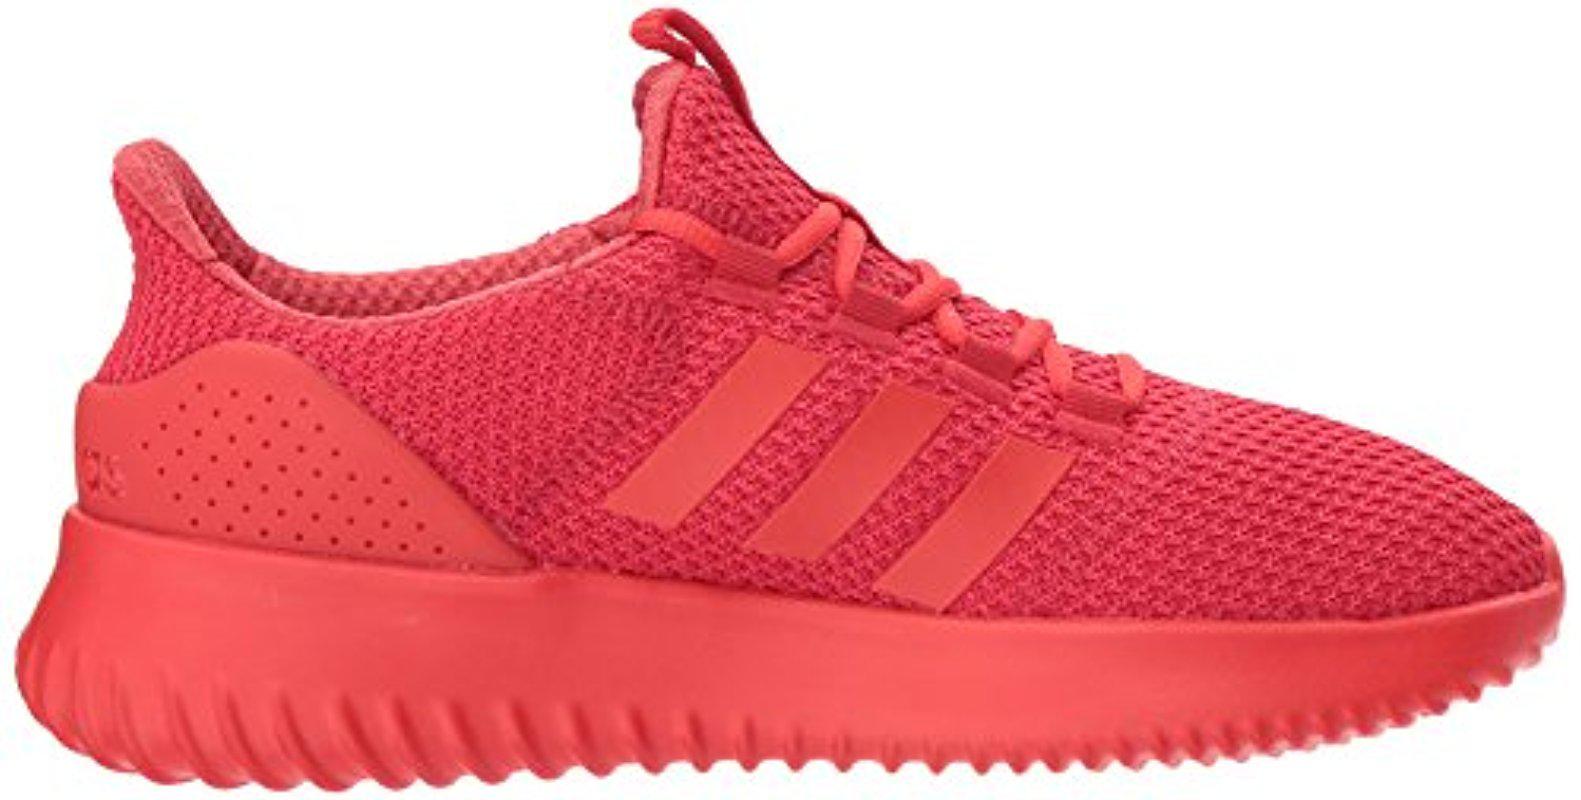 Adidas Cloudfoam Ultimate Red Hotsell, 59% OFF | www.visitmontanejos.com